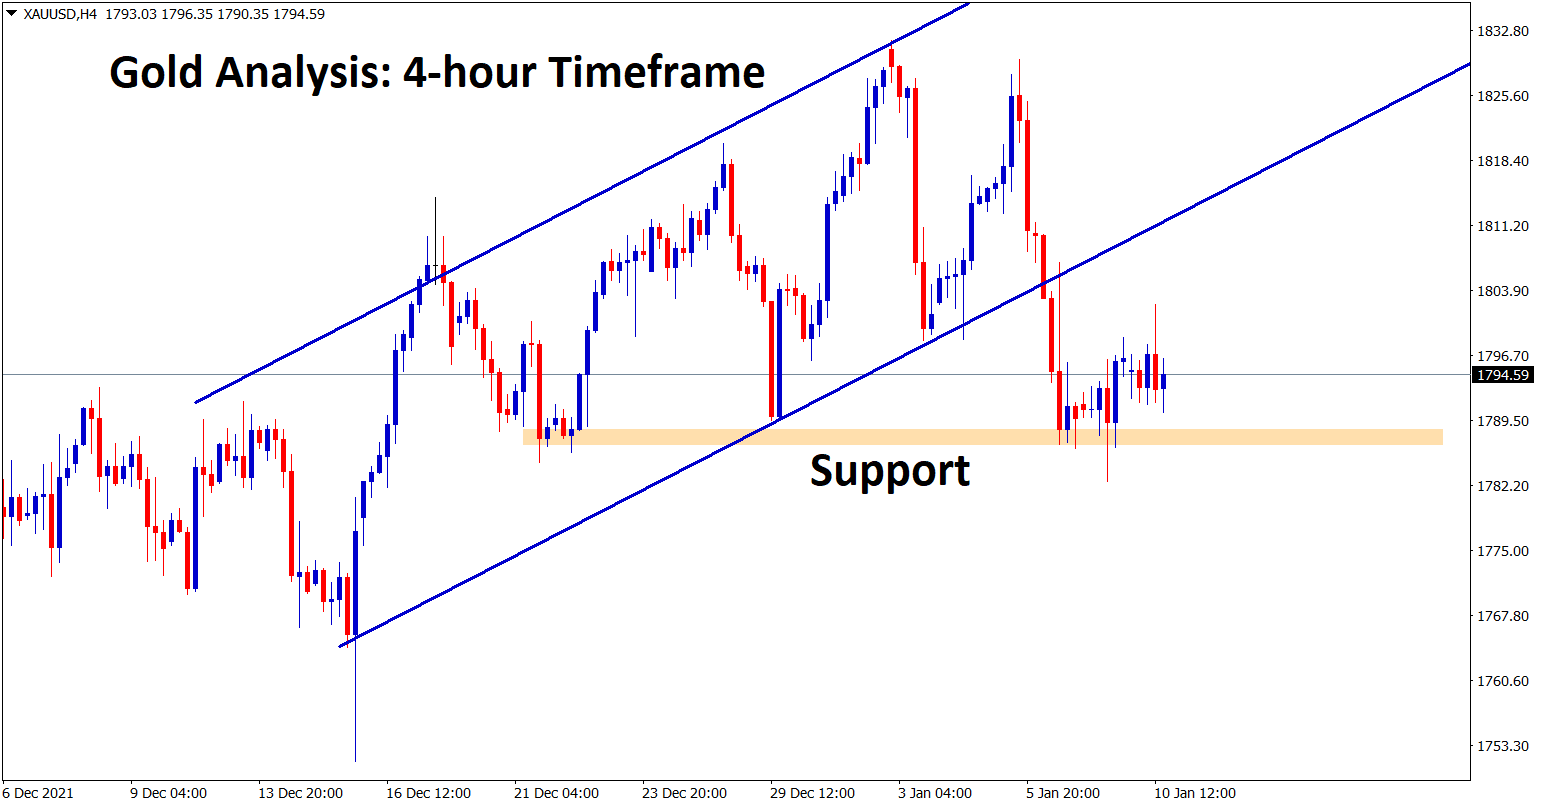 Gold price is consolidating at the support area